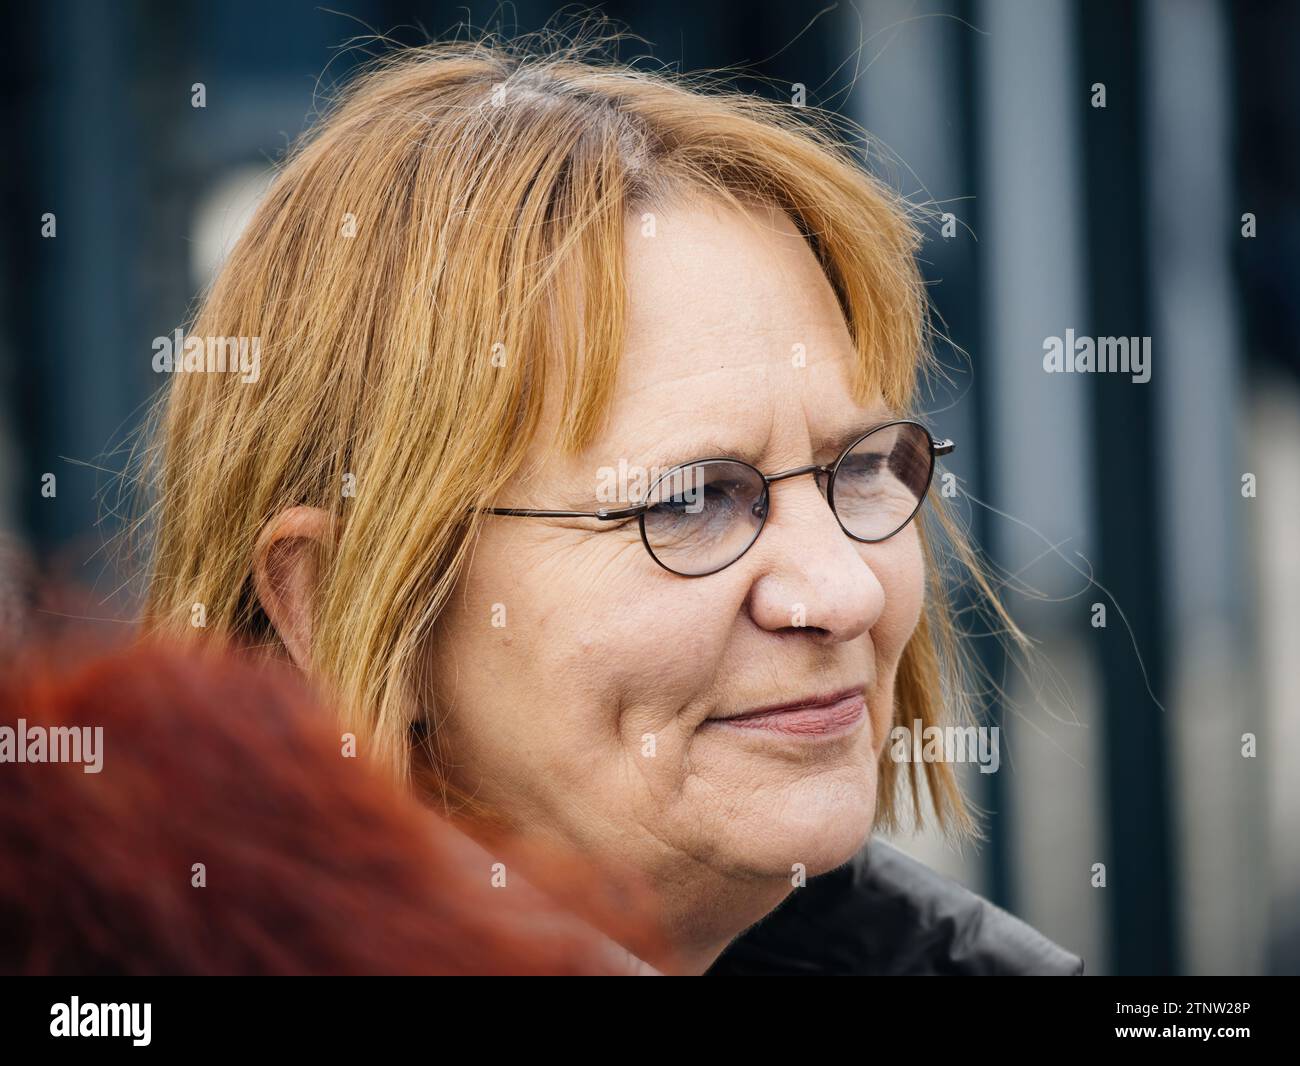 Strasbourg, France - Mar 29, 2023: Portrait of a determined Swiss senior peacefully protest in front of the European Court for Human Rights, holding p Stock Photo